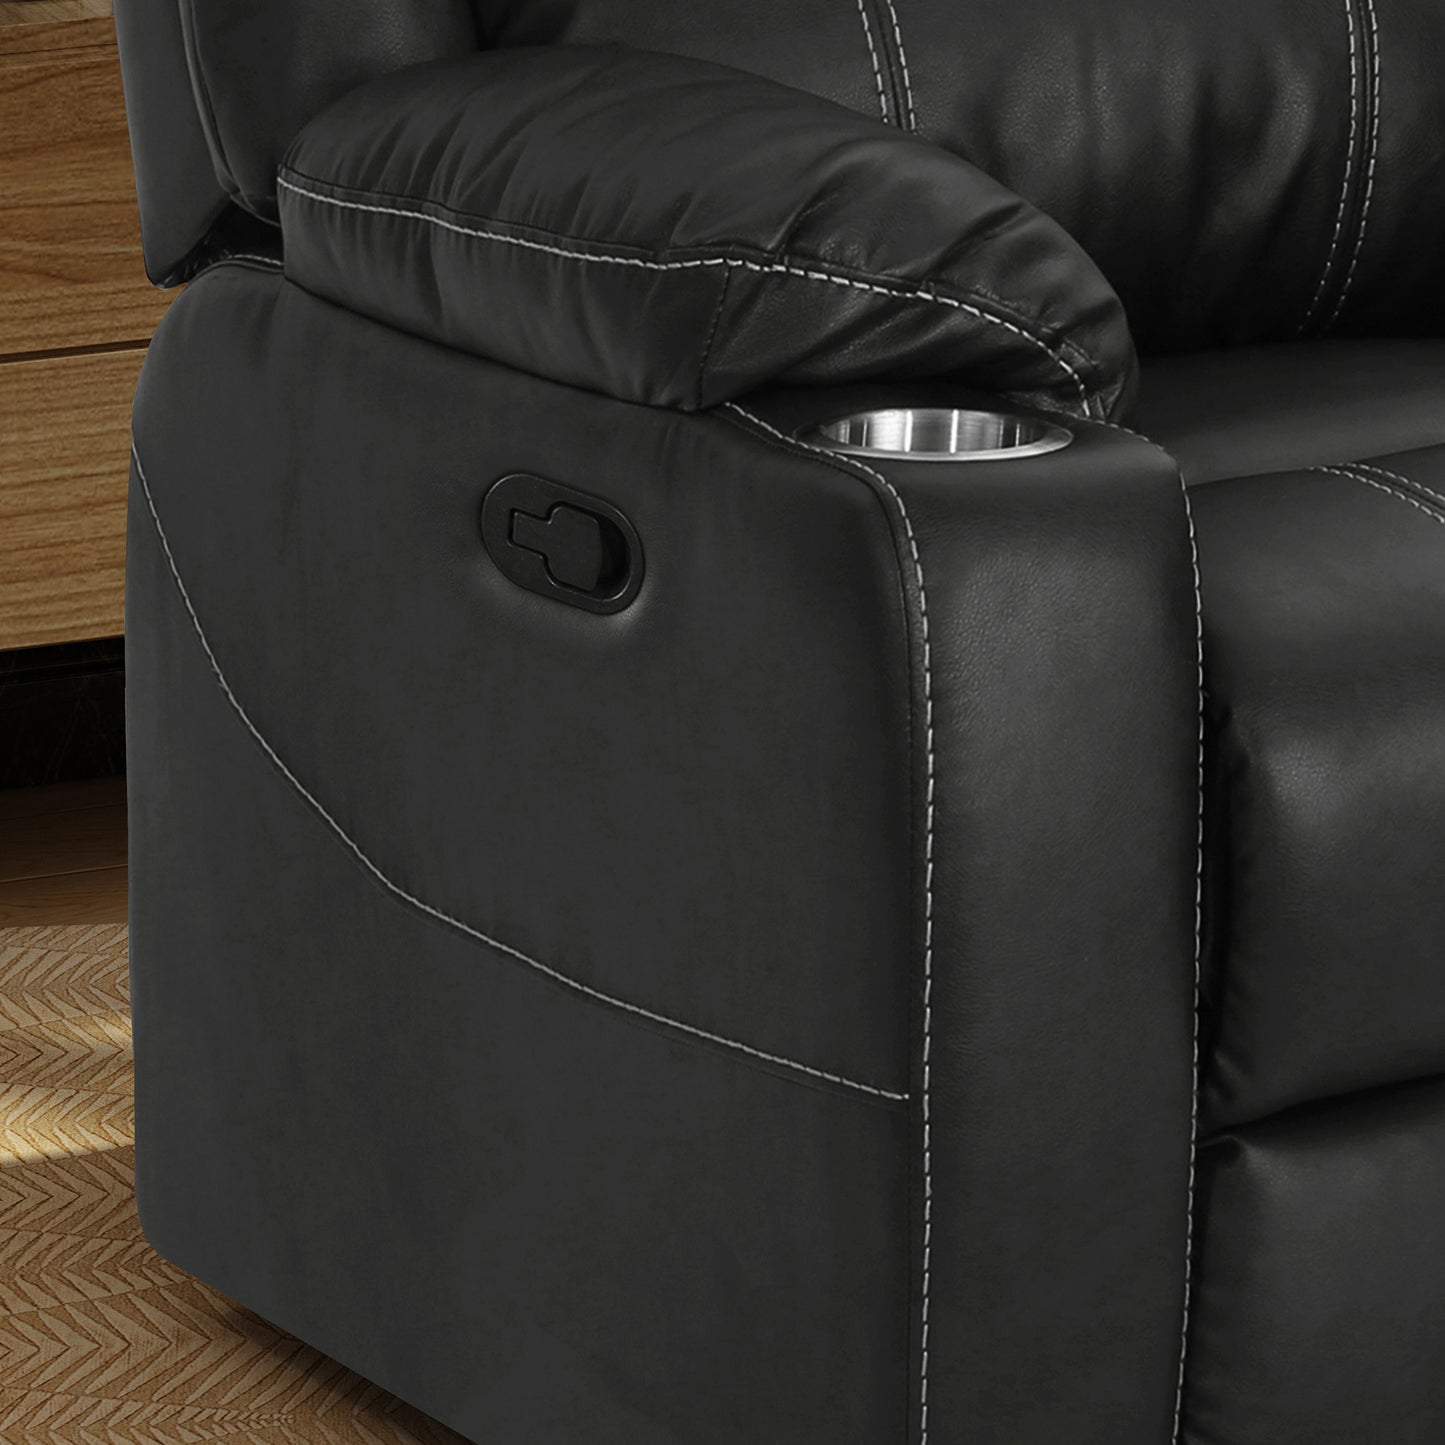 Sophia Traditional Leather Recliner with Steel Cup Holders